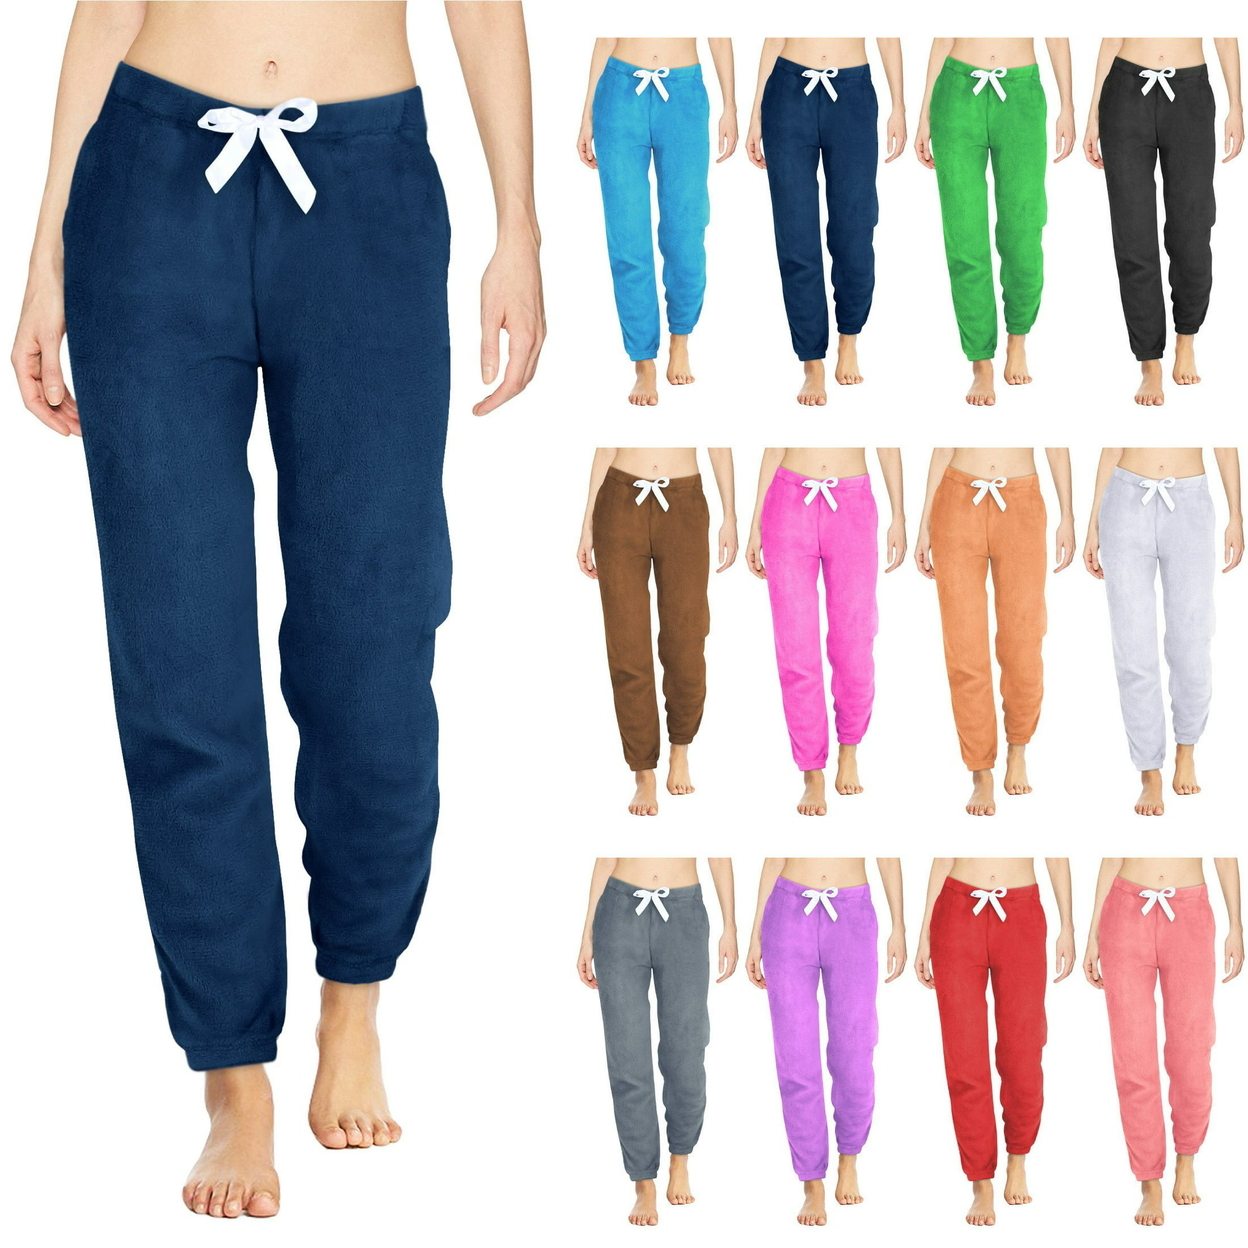 Multi-Pack: Women's Solid & Printed Ultra-Soft Comfy Stretch Micro-Fleece Pajama Lounge Pants - 3-pack, Large, Solid